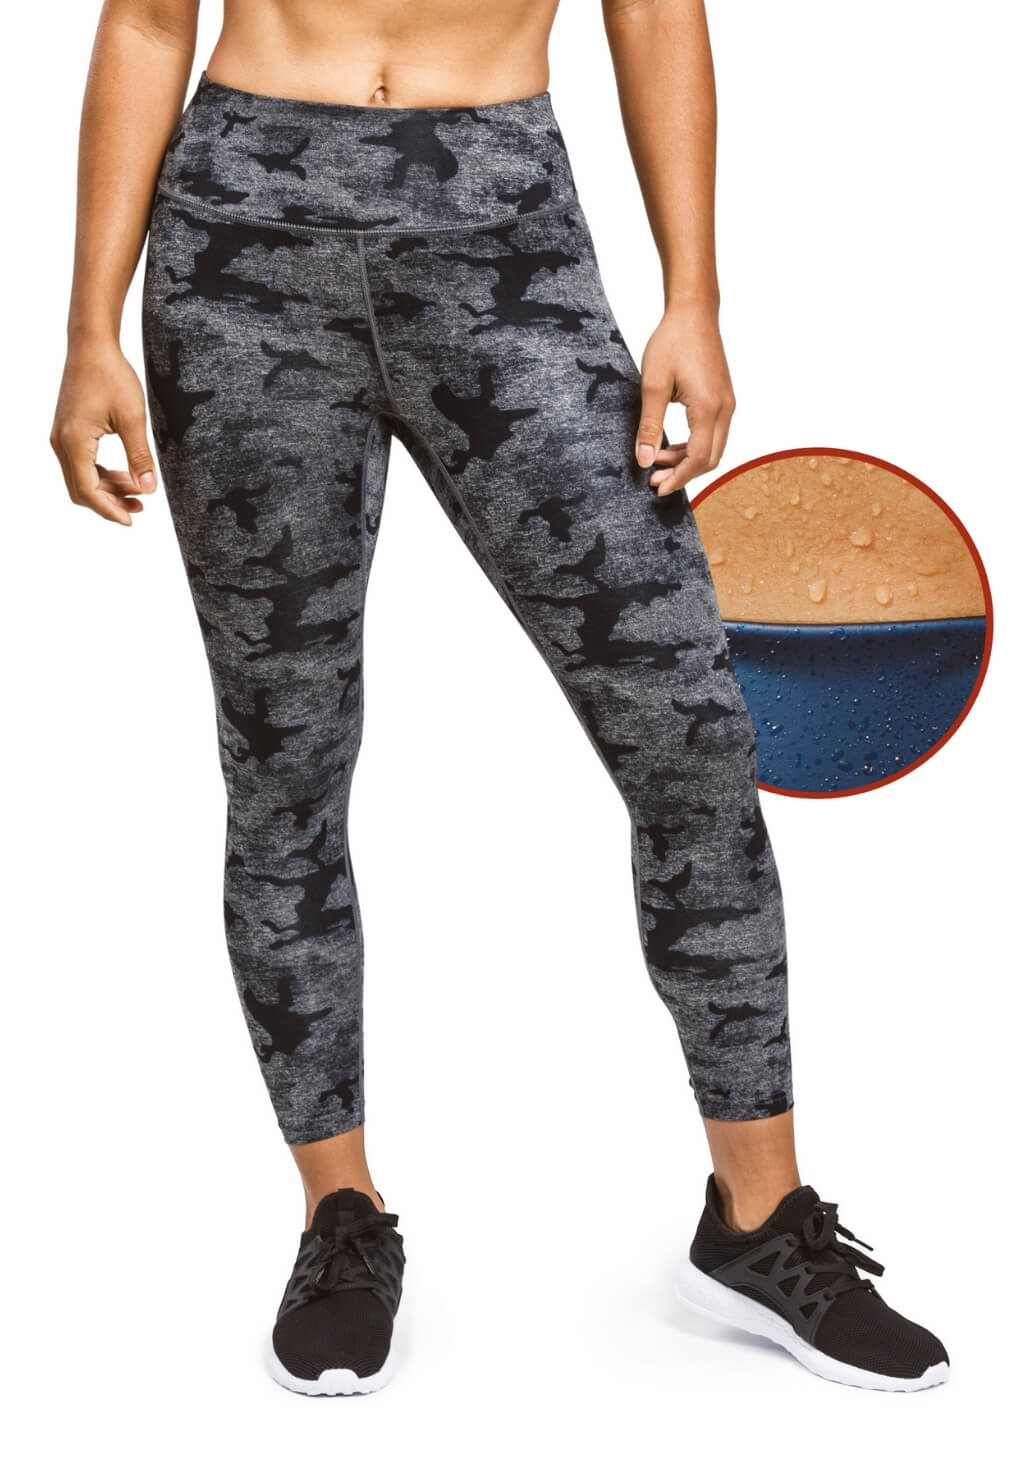 Shascullfites gym and shaping Army Pants Camouflage Leggings Women